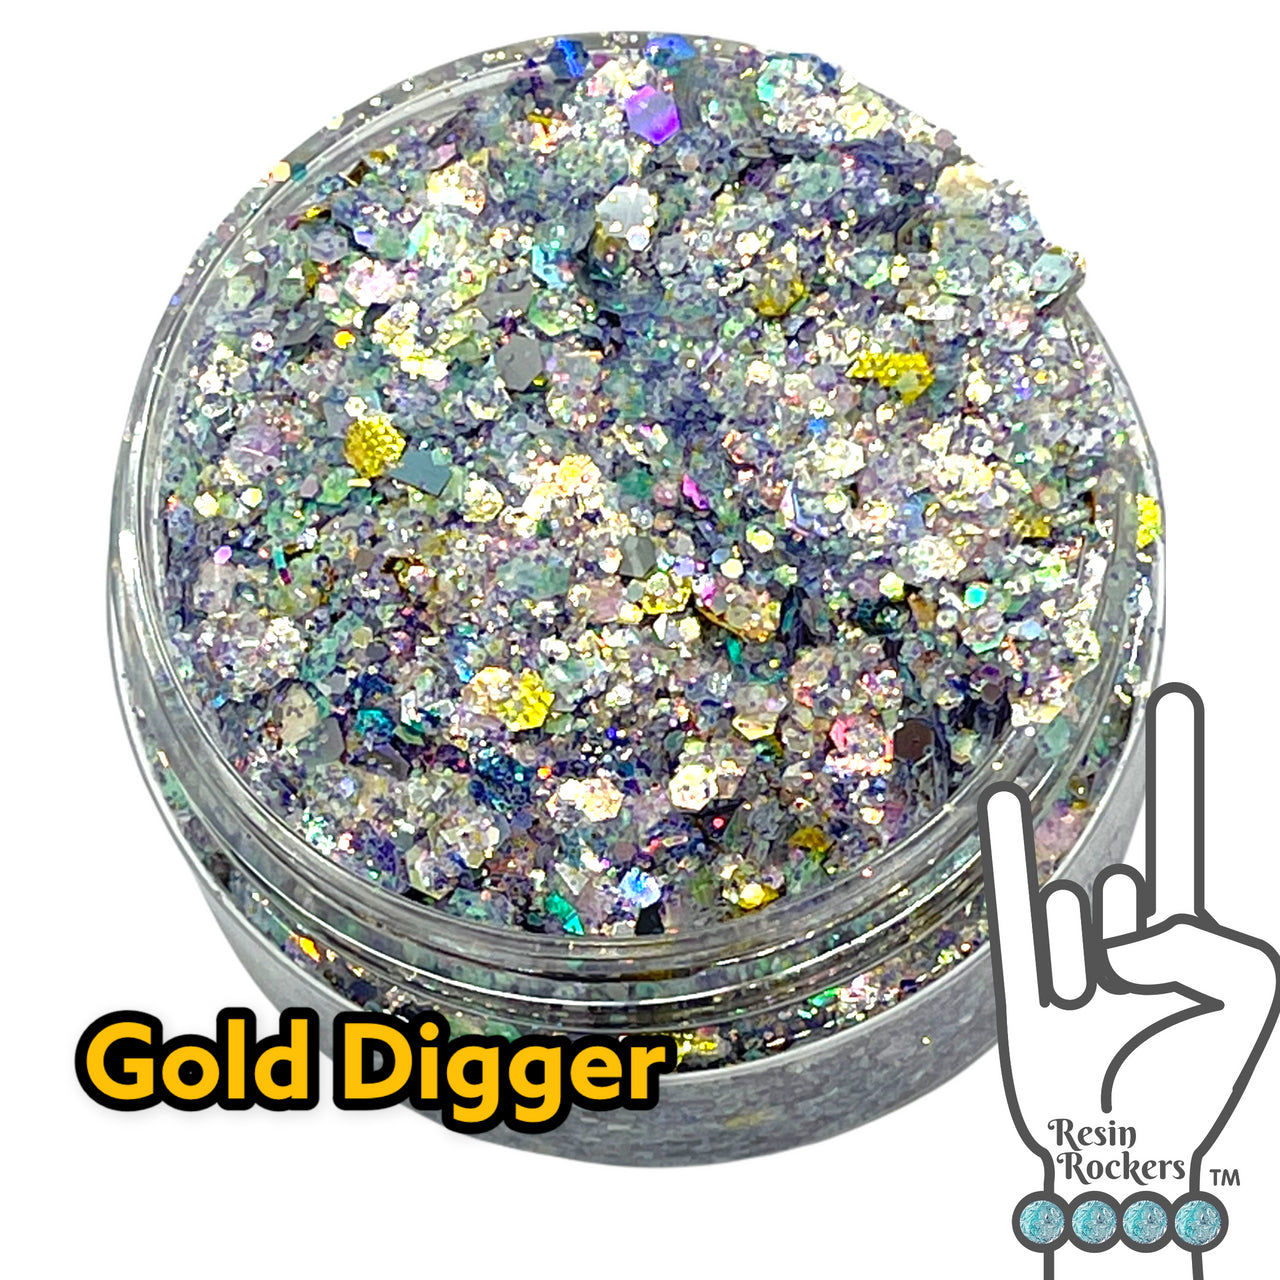 Gold Digger Premium Pixie for Poxy Chunky Glitter Mix 1 oz.